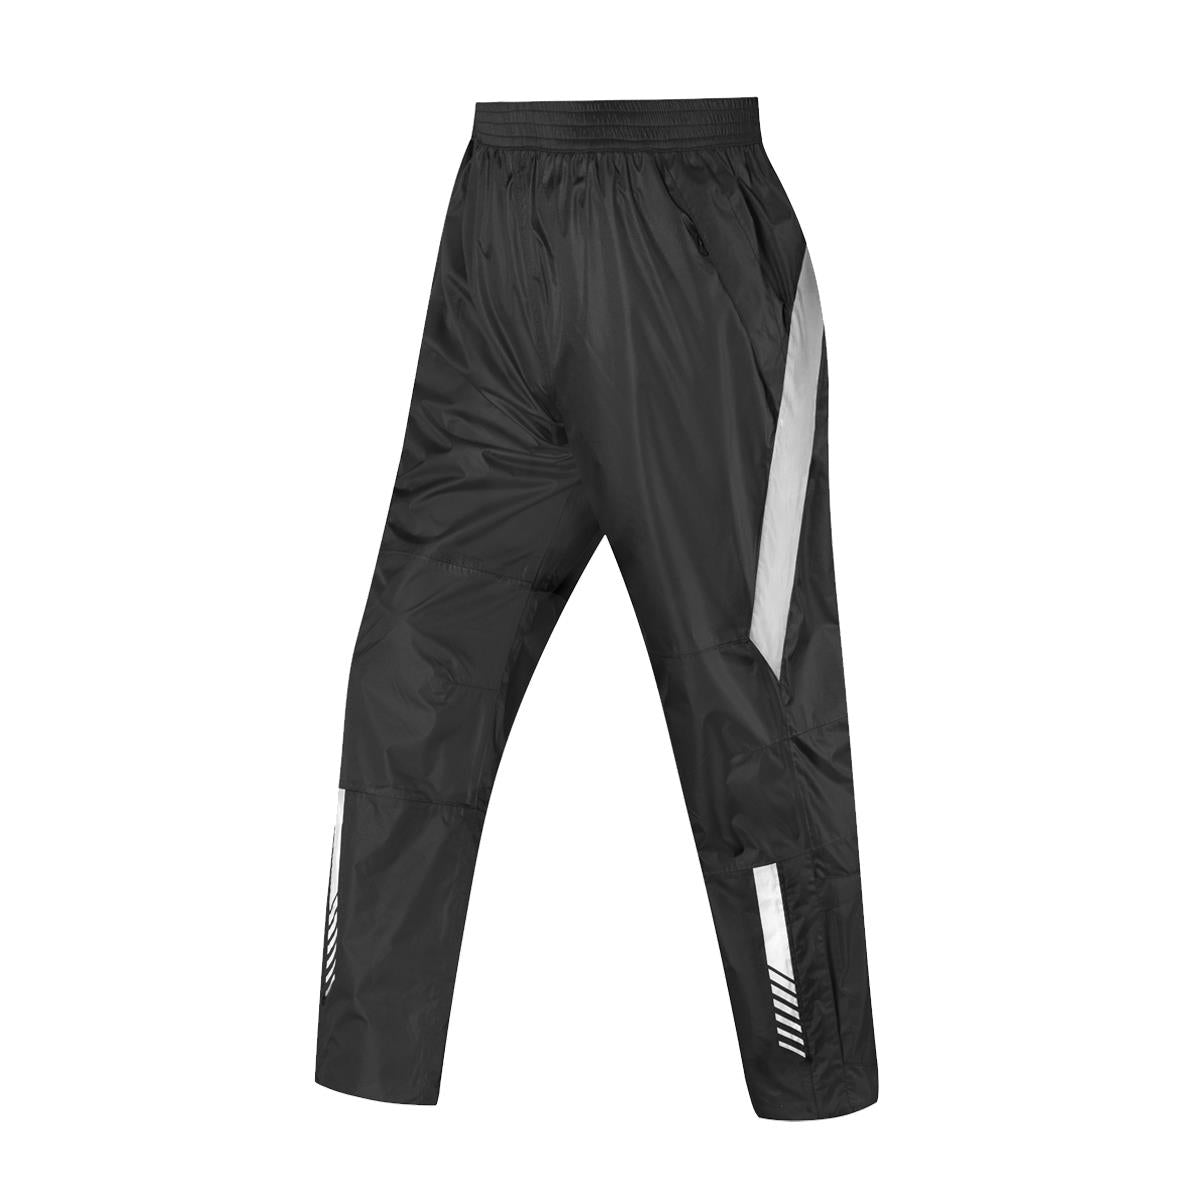 Altura Nightvision 3 Waterproof Overtrouser